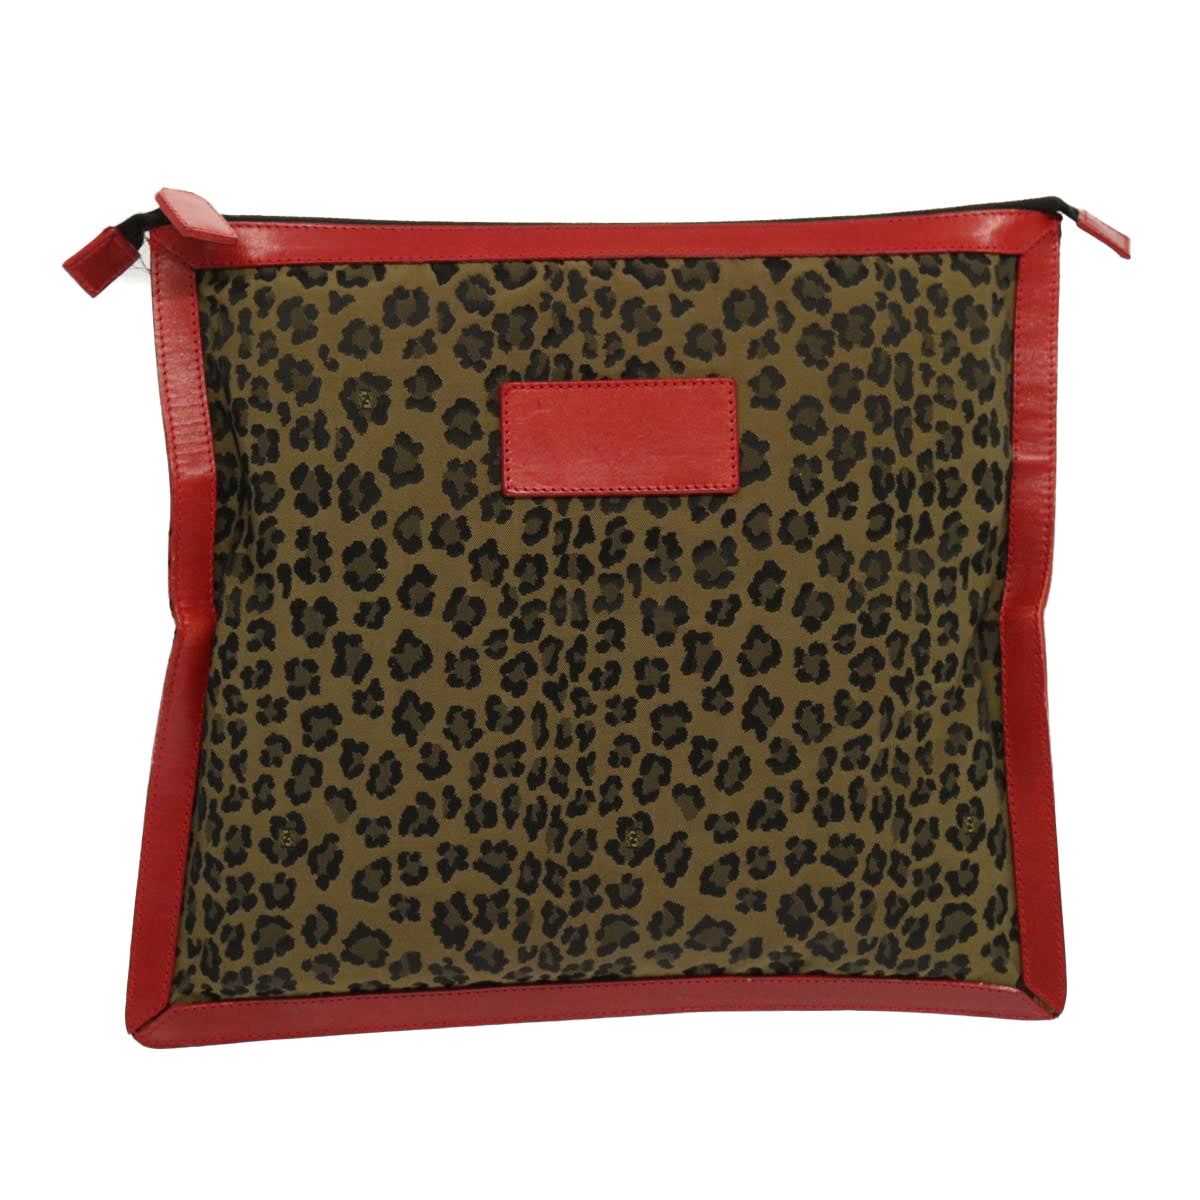 FENDI Leopard Clutch Bag Nylon Leather Red Brown Auth bs13085 - 0